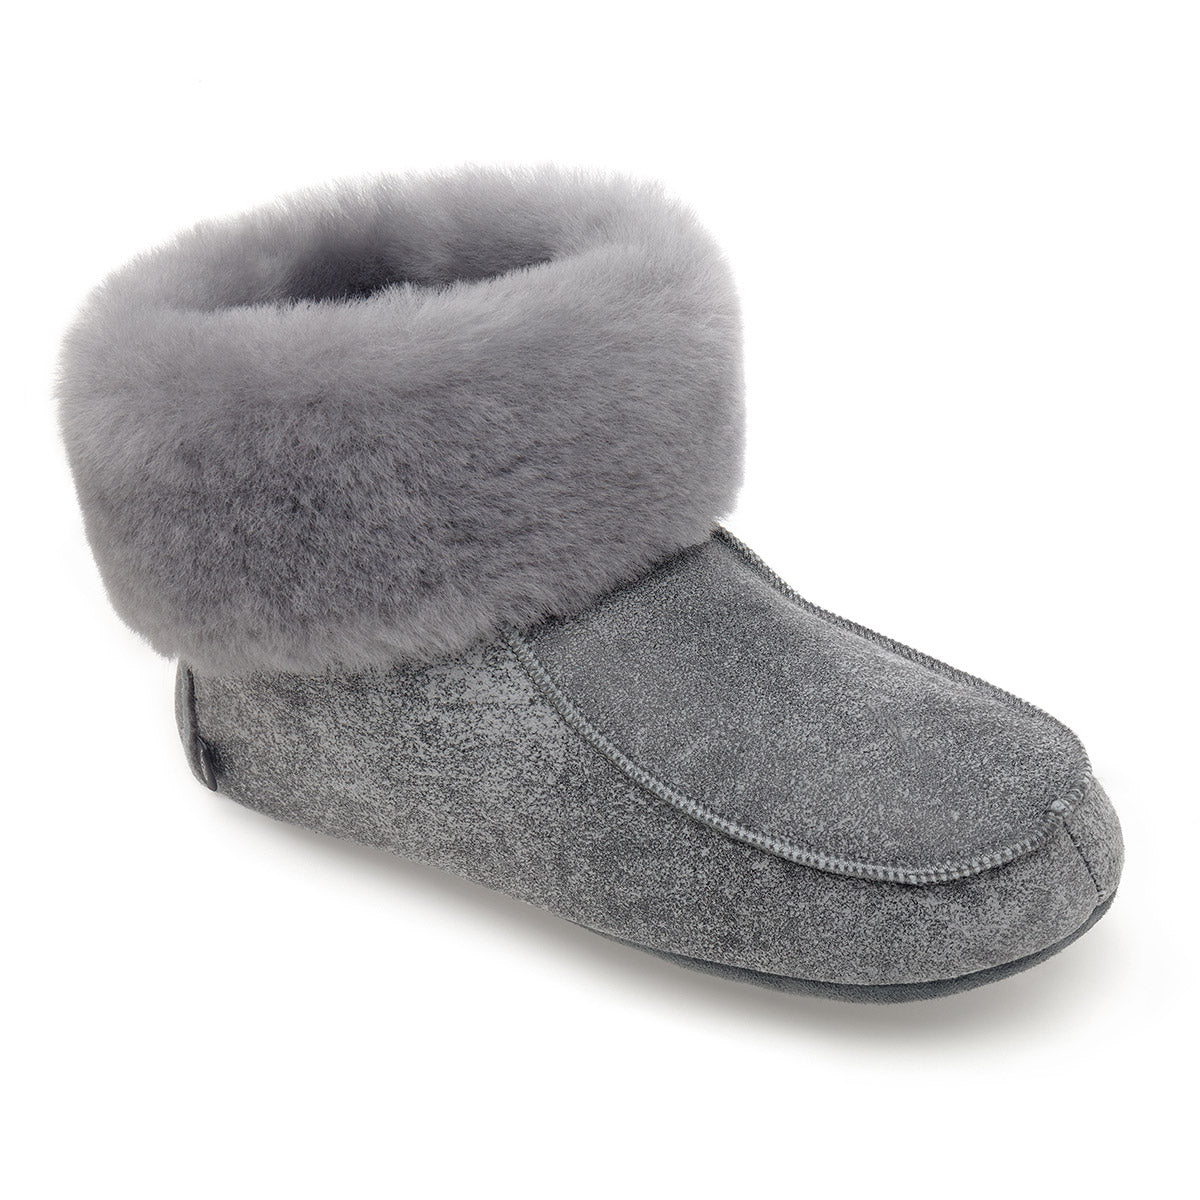 Aster Sheepskin Slippers - Grey Distressed Leather